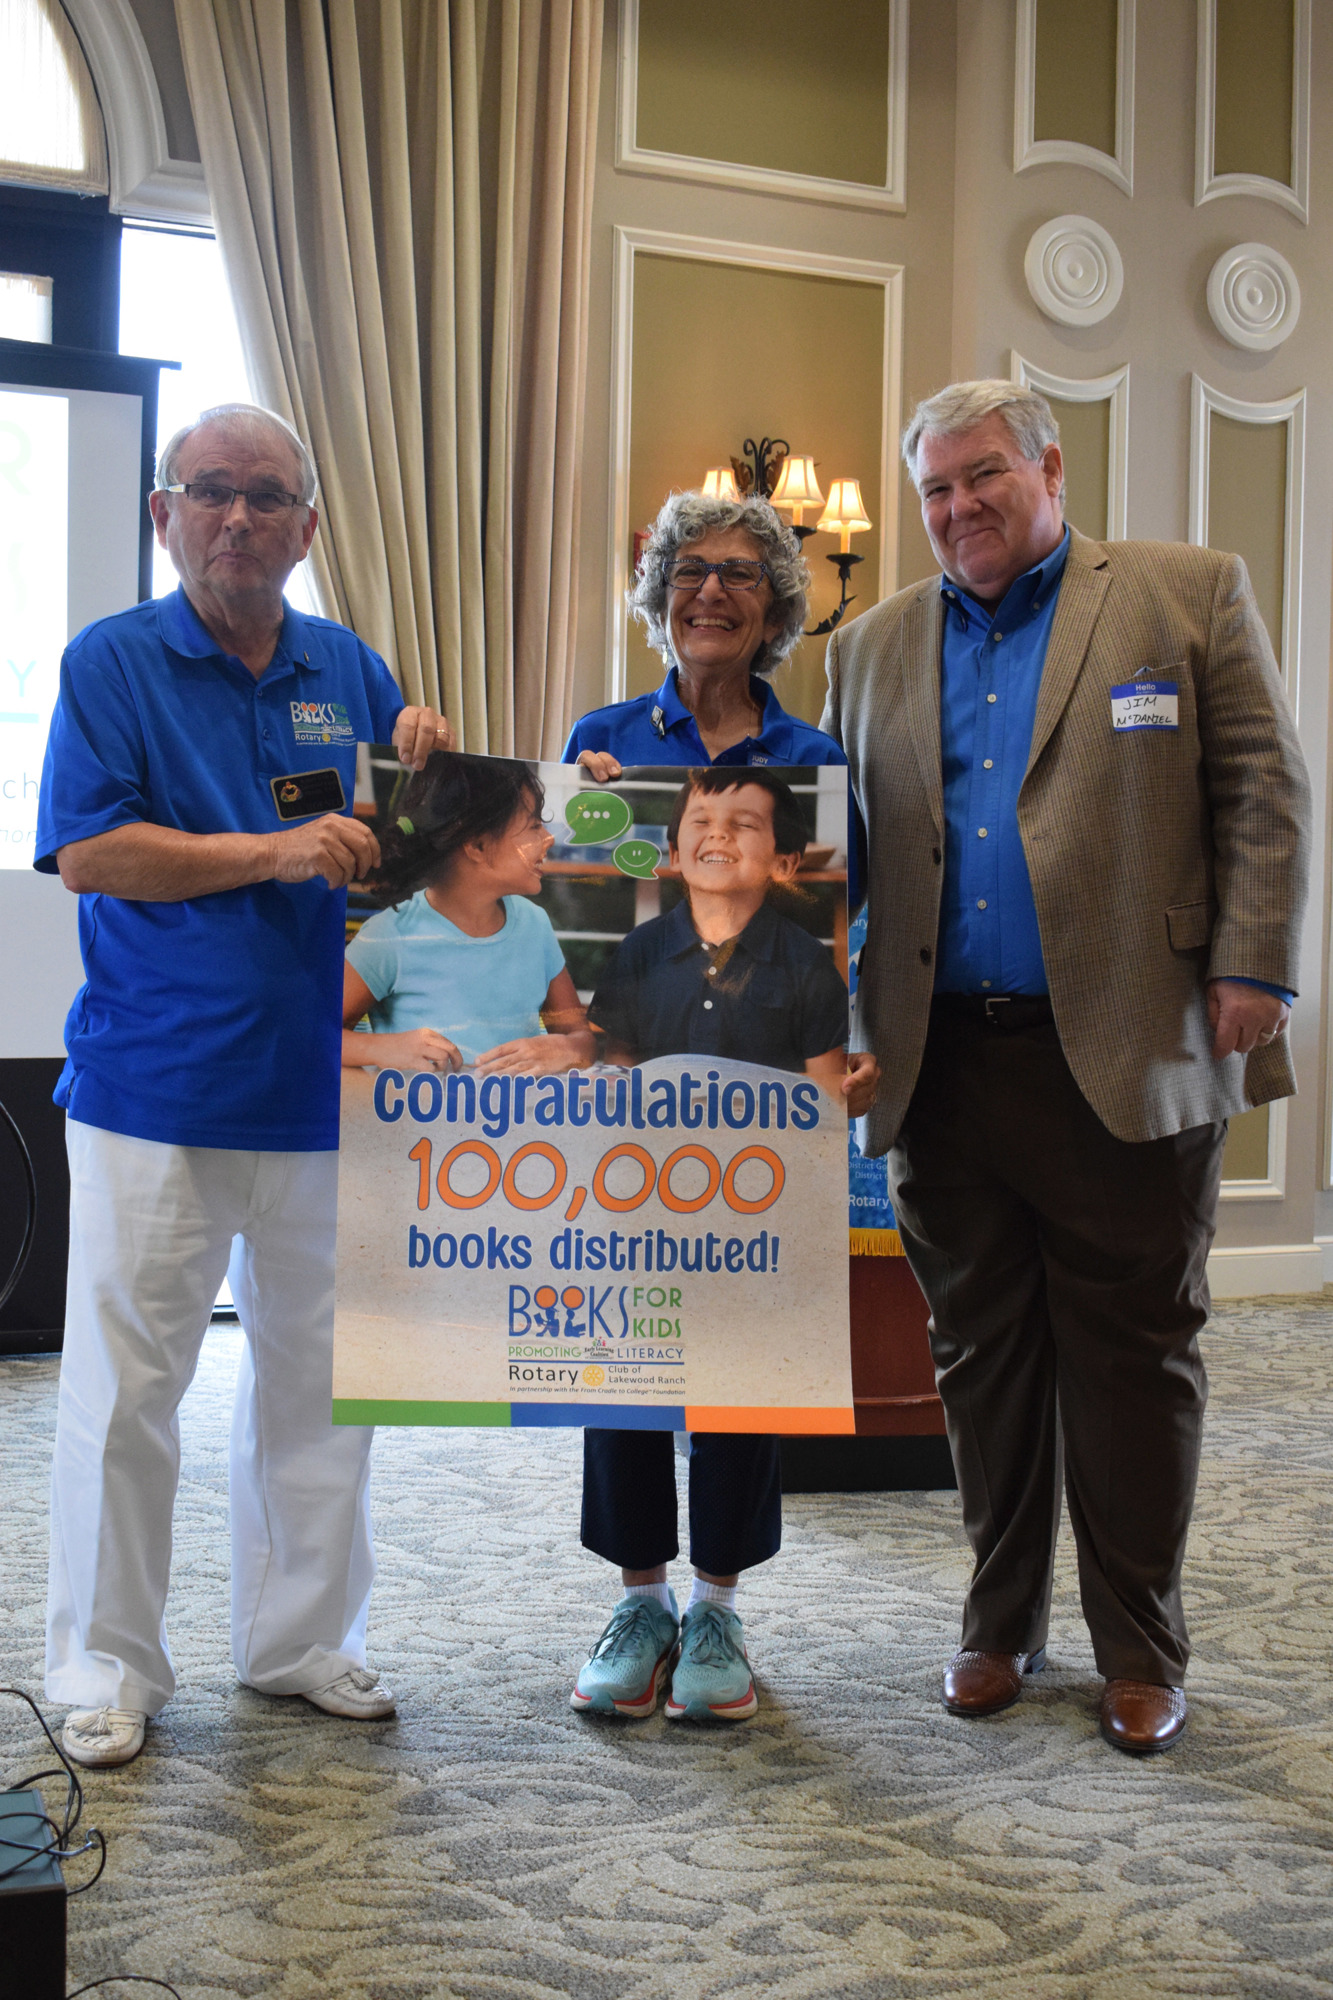 Rotary Club of Lakewood Ranch members Paul Hoenle and Judy Berlow and Jim McDaniel, the president of the Anna Maria Rotary Club and former Lakewood Ranch rotarian, celebrate the Books for Kids program distributing 100,000 books.